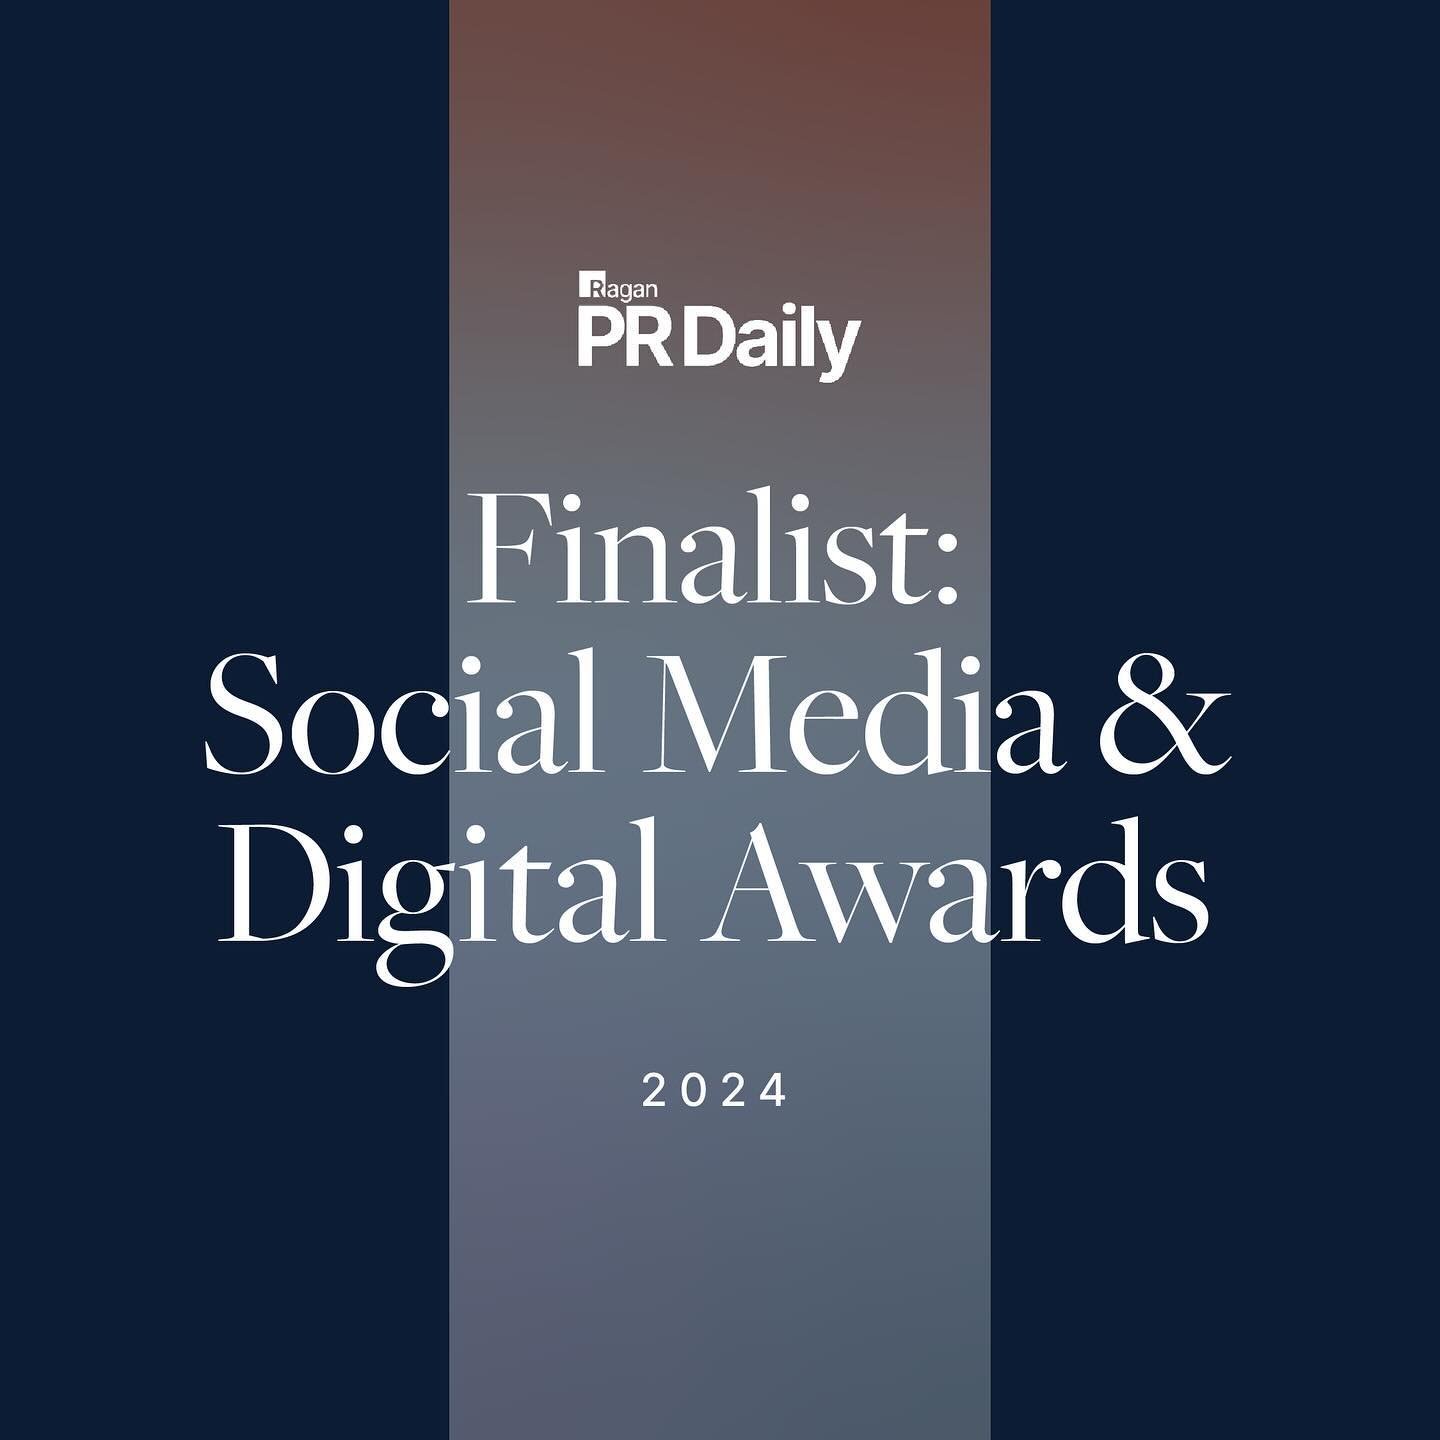 📣&nbsp;KWT Global has been named a&nbsp;finalist in not one but&nbsp;three of the following categories for the 2024 Social Media &amp; Digital Awards hosted by @prdaily_!&nbsp;

🌟 TikTok Campaign:&nbsp;Our&nbsp;@illuminainc&nbsp;team&nbsp;helped la